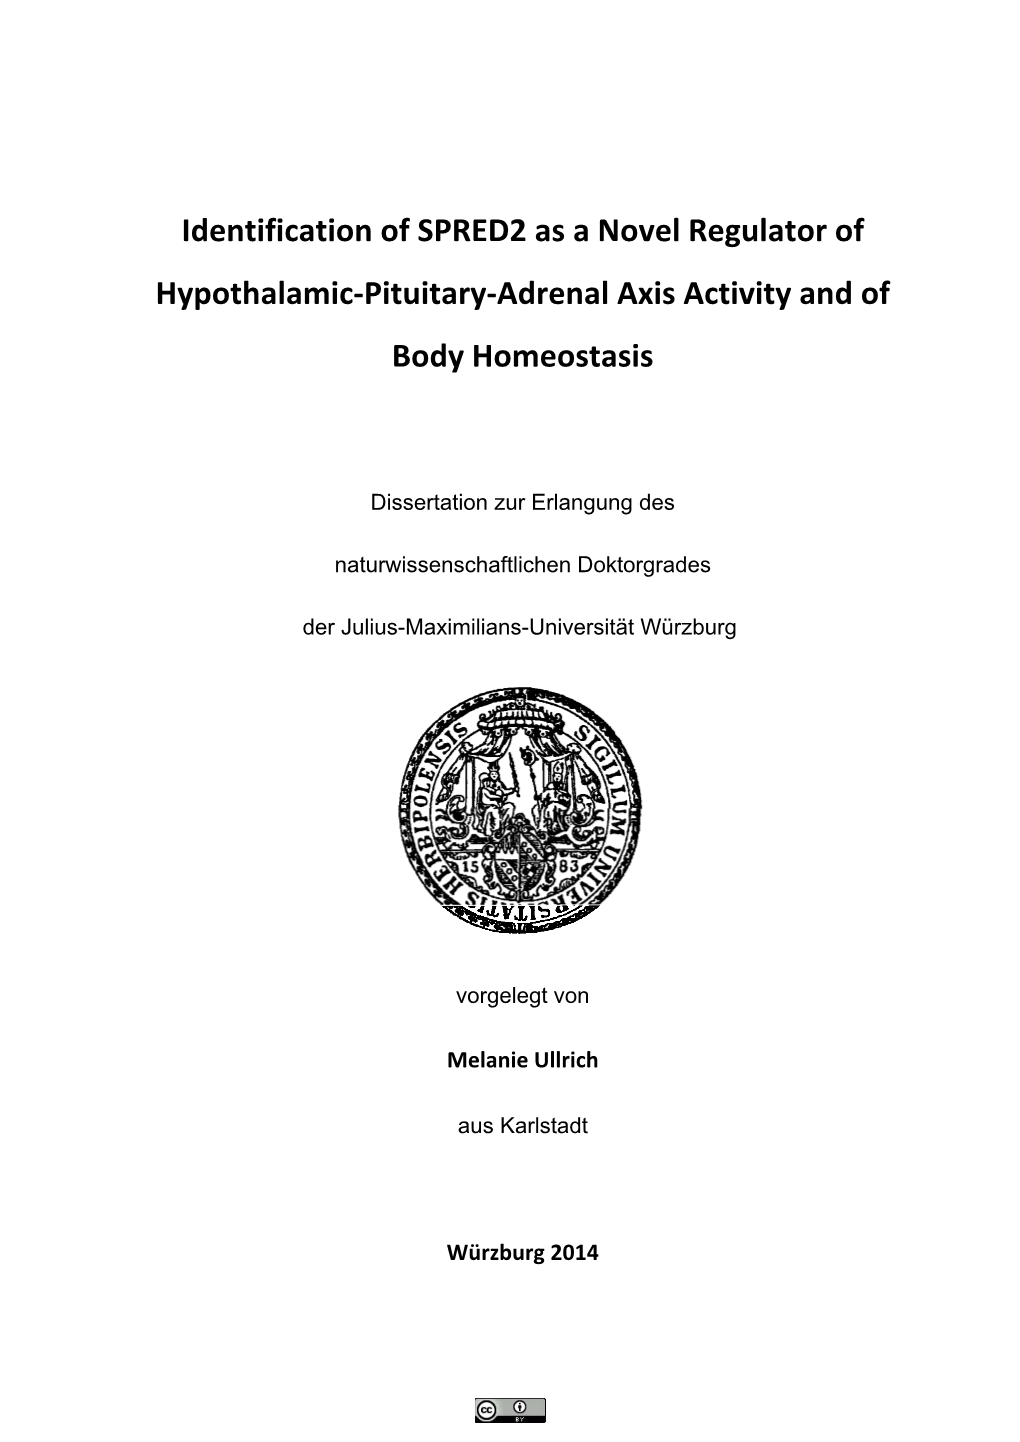 Identification of SPRED2 As a Novel Regulator of Hypothalamic-Pituitary-Adrenal Axis Activity and of Body Homeostasis“ Eigenständig, D.H